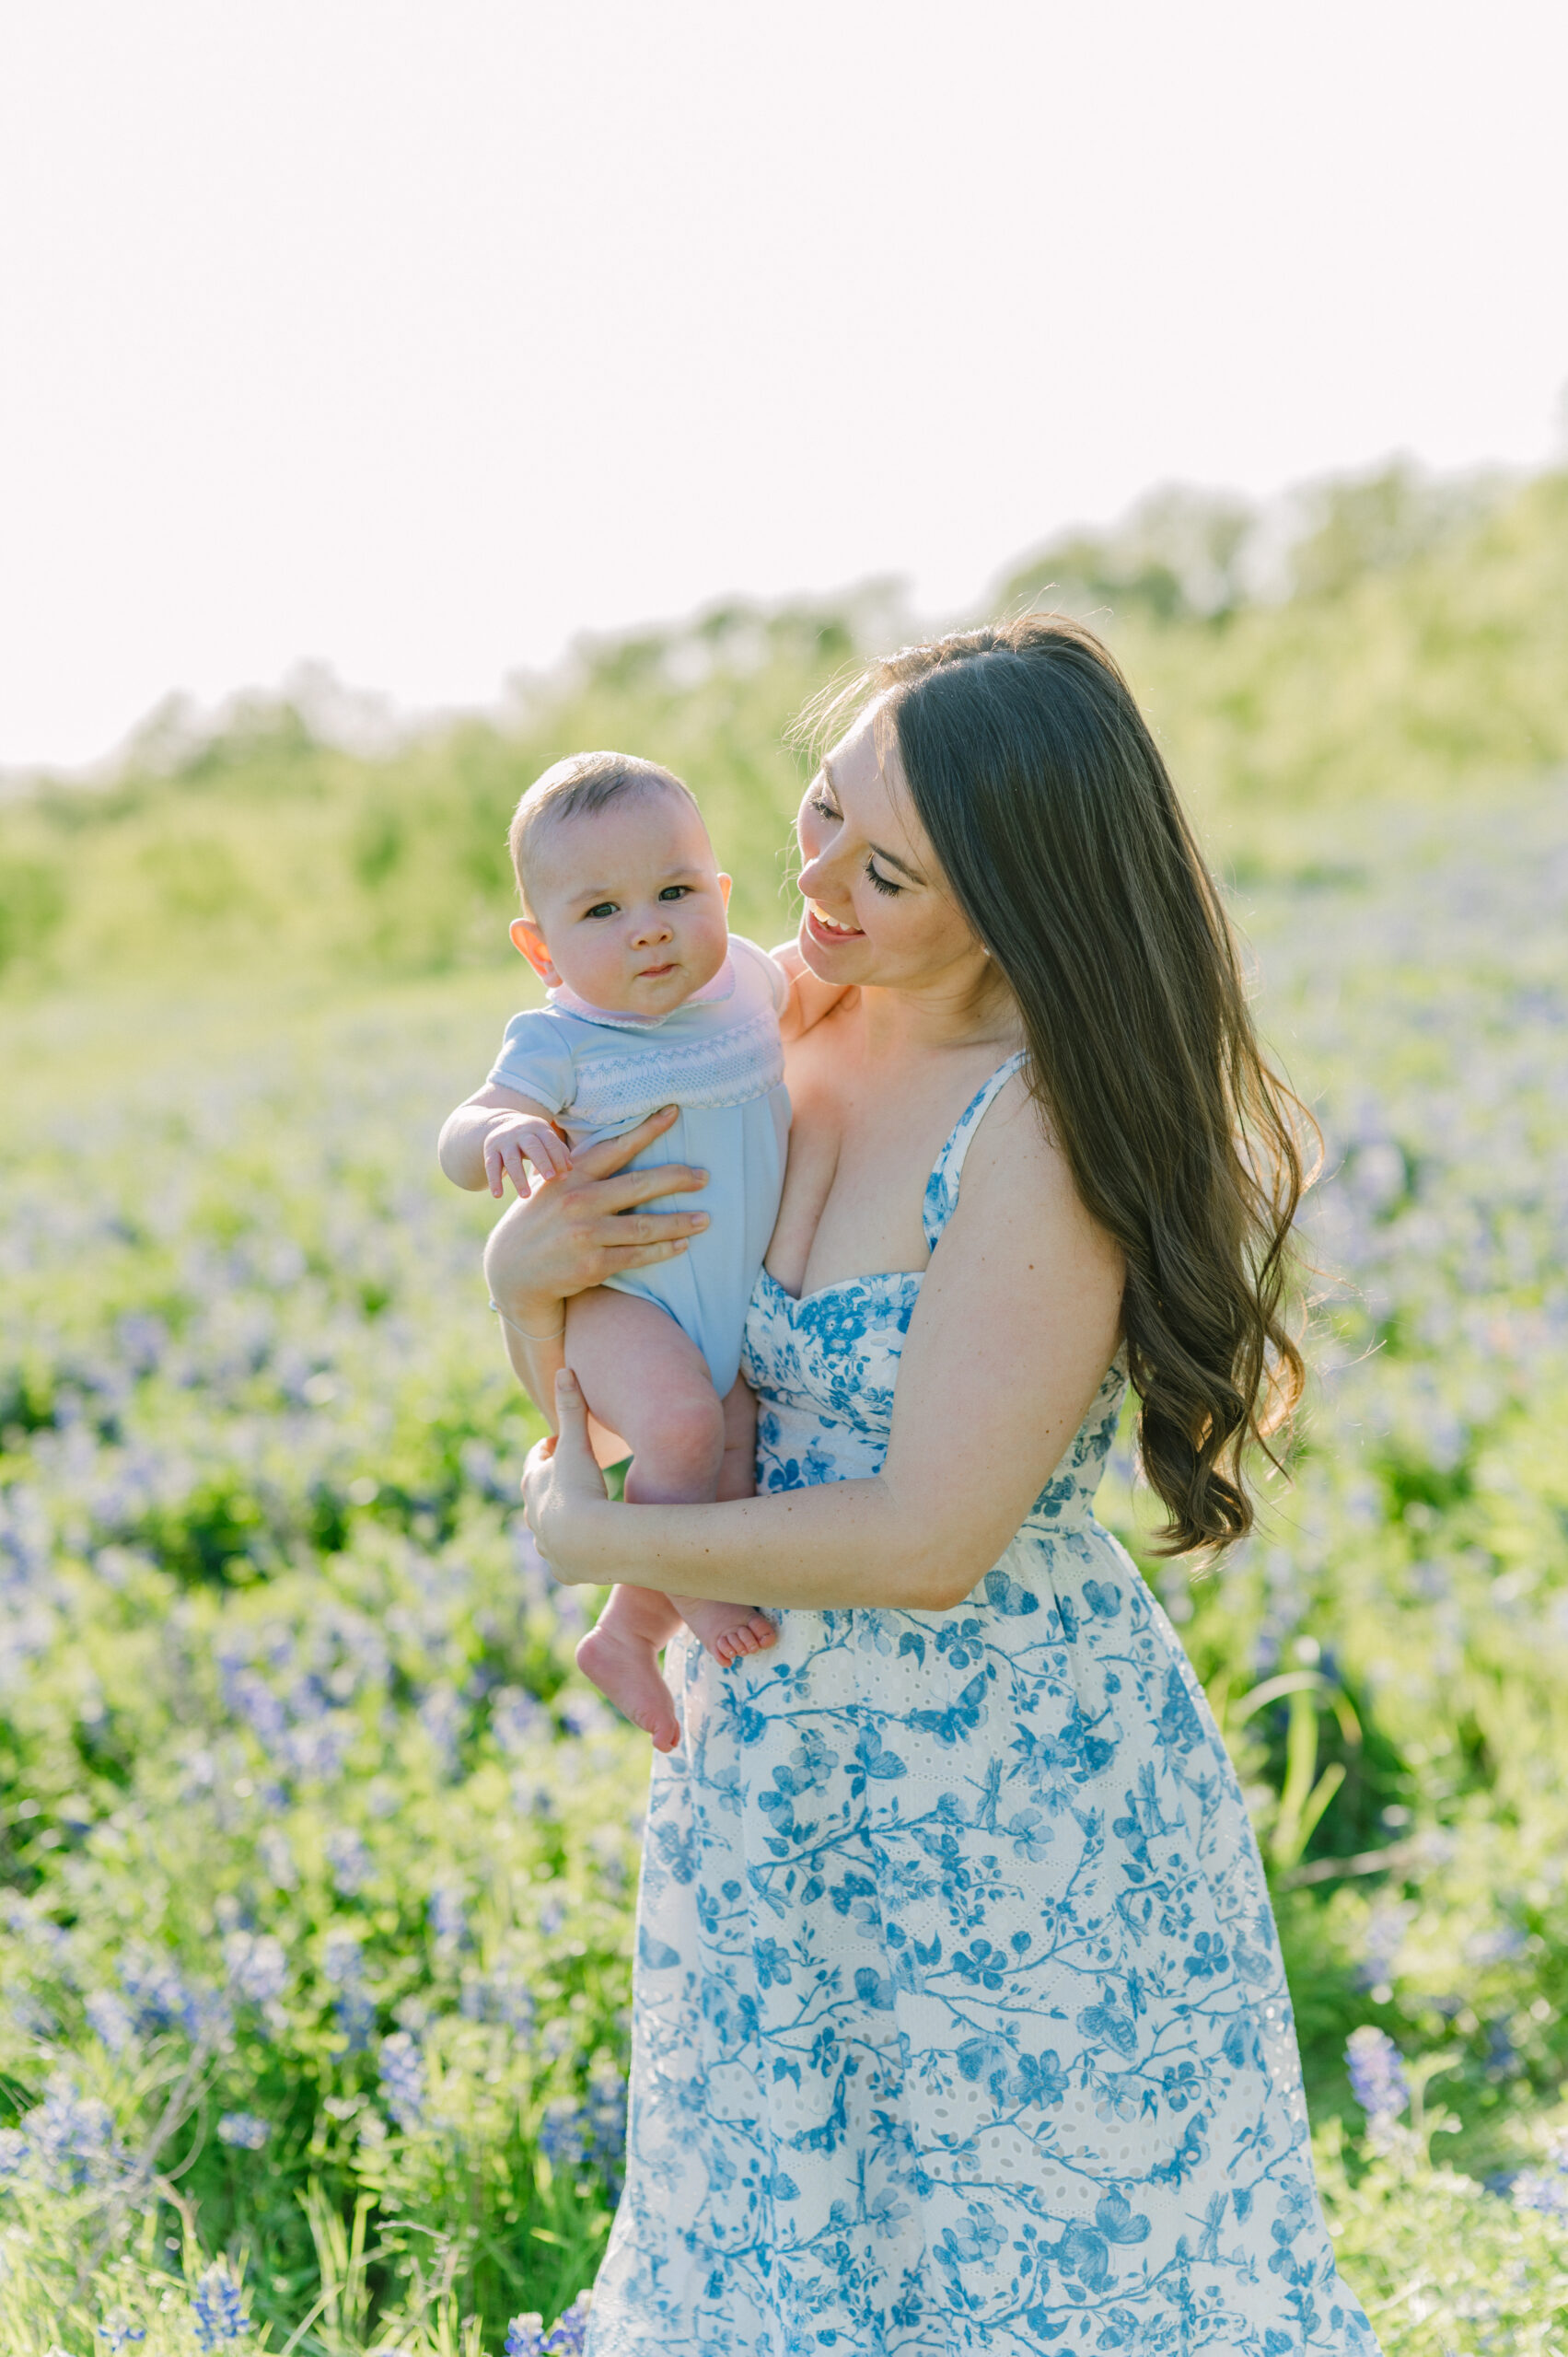 Mother dancing with her baby in a field of bluebonnets.